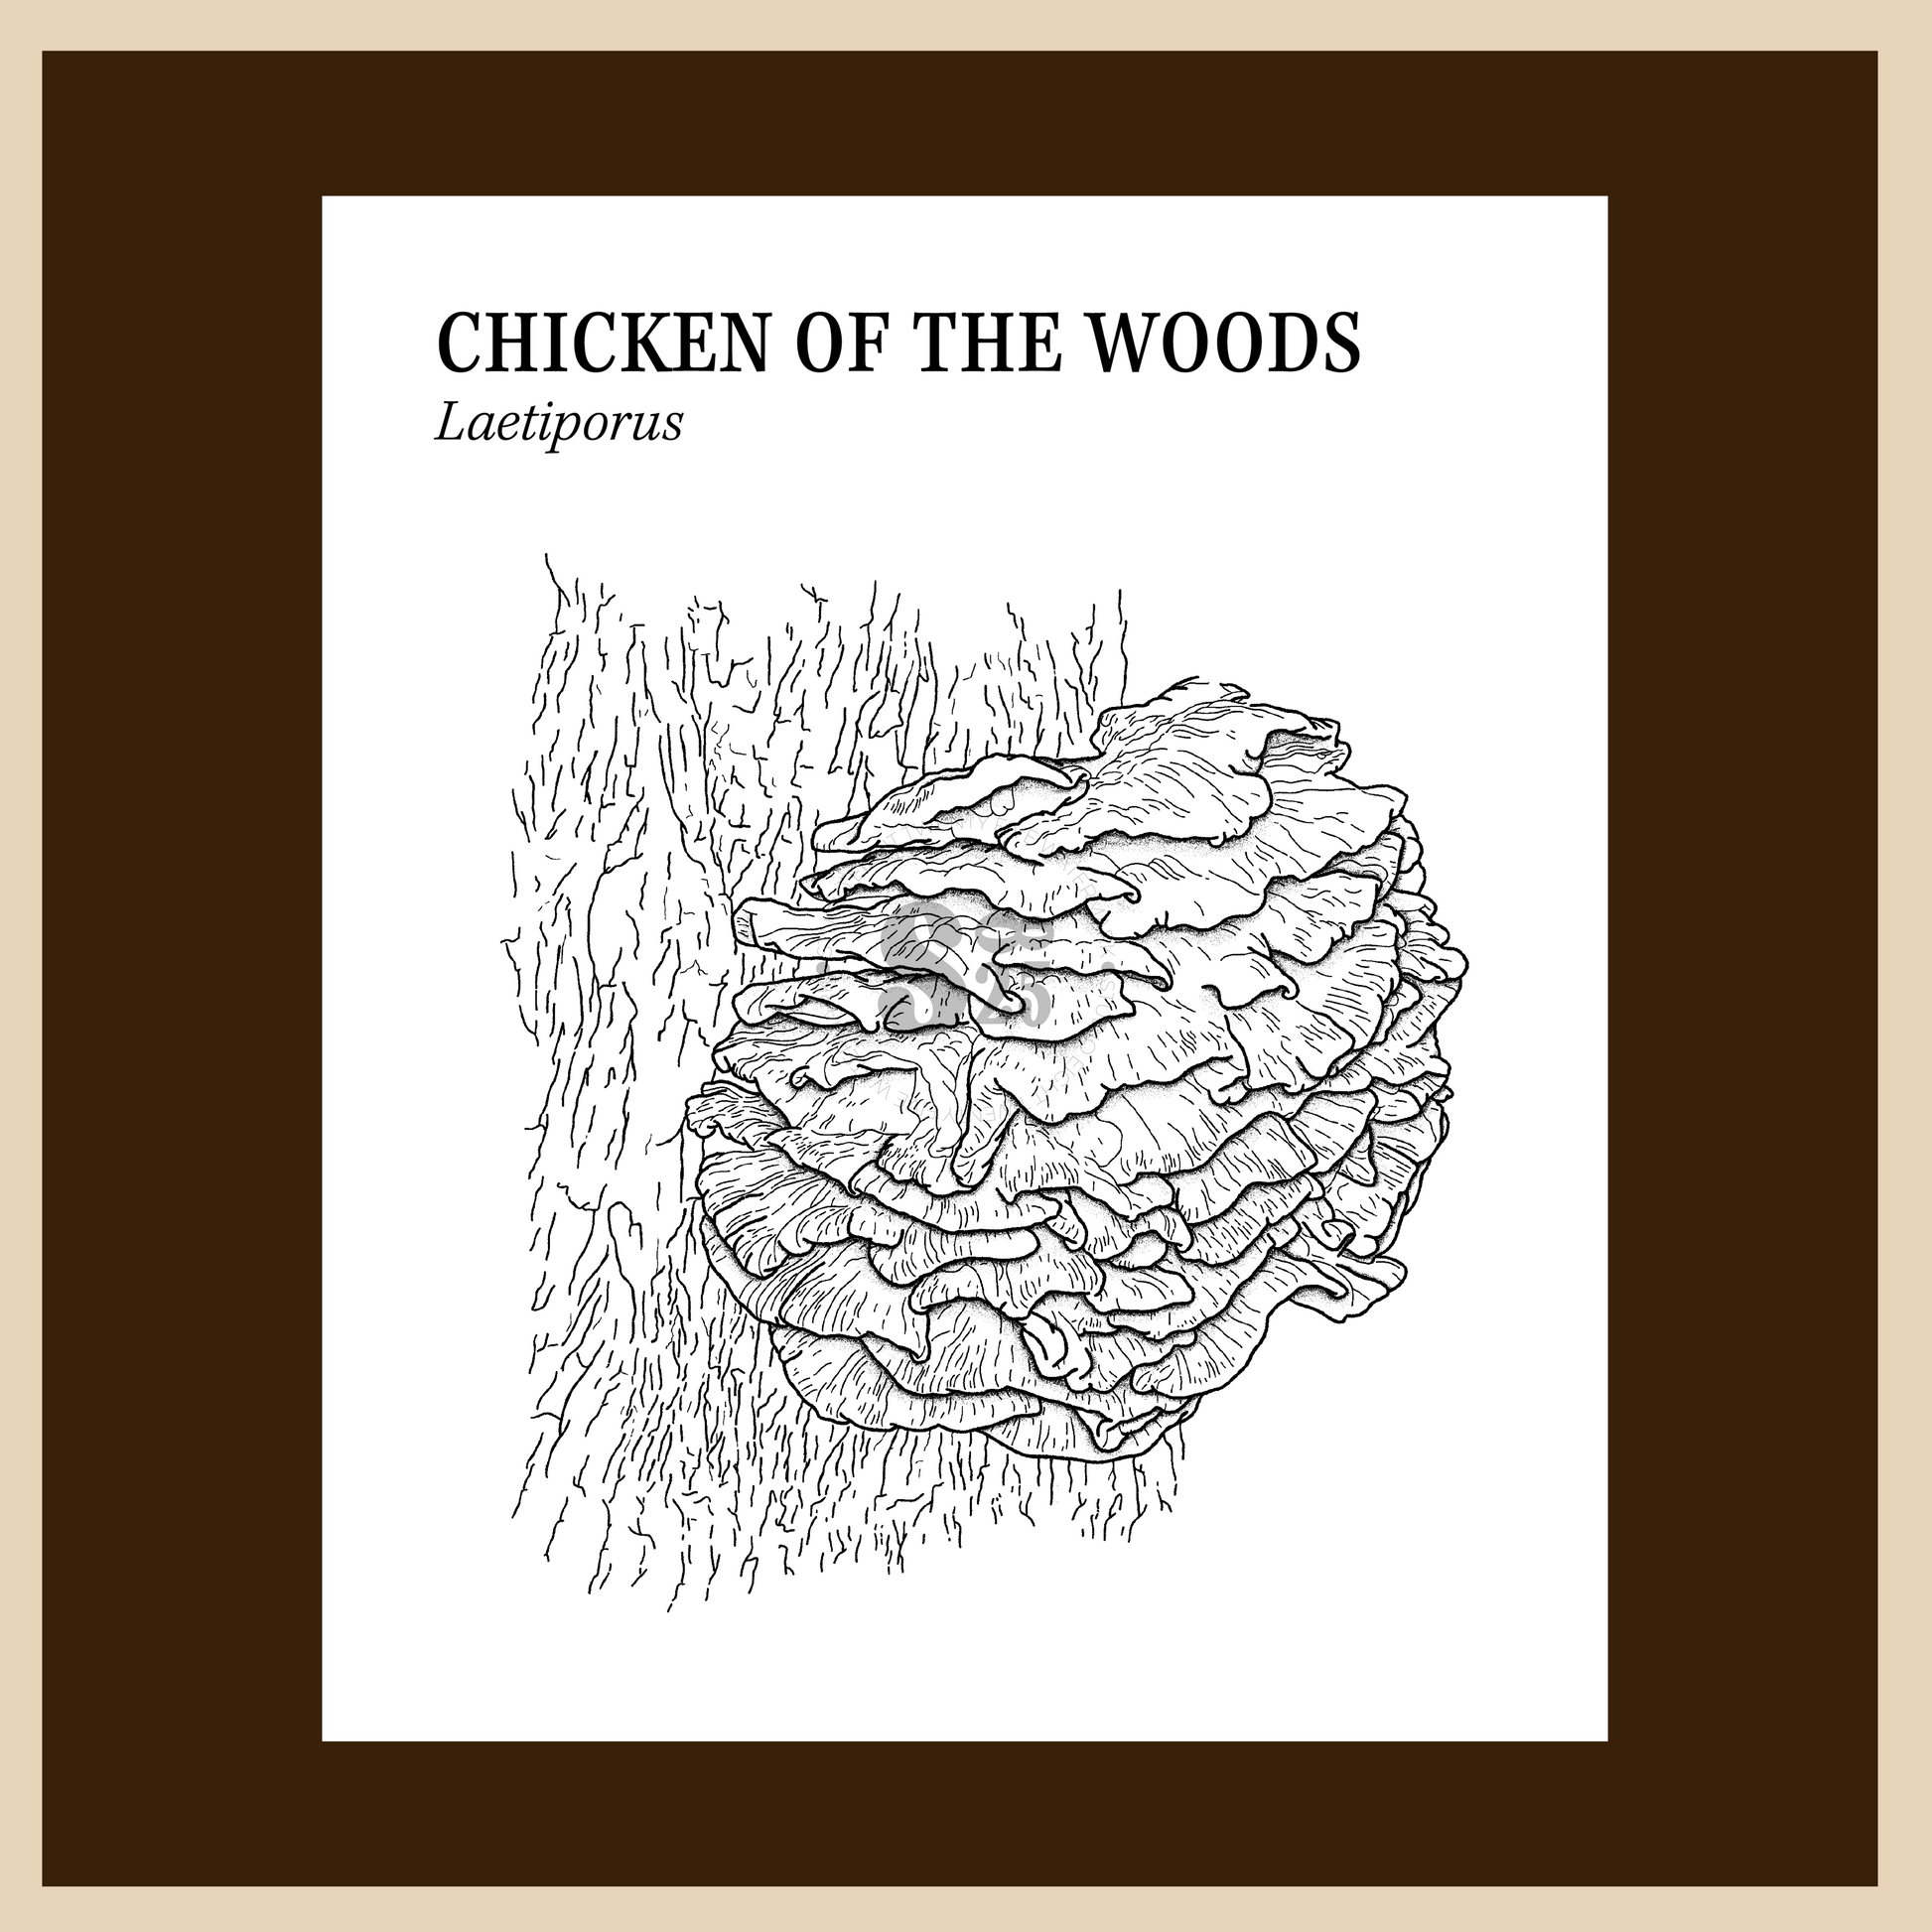 woods coloring pages